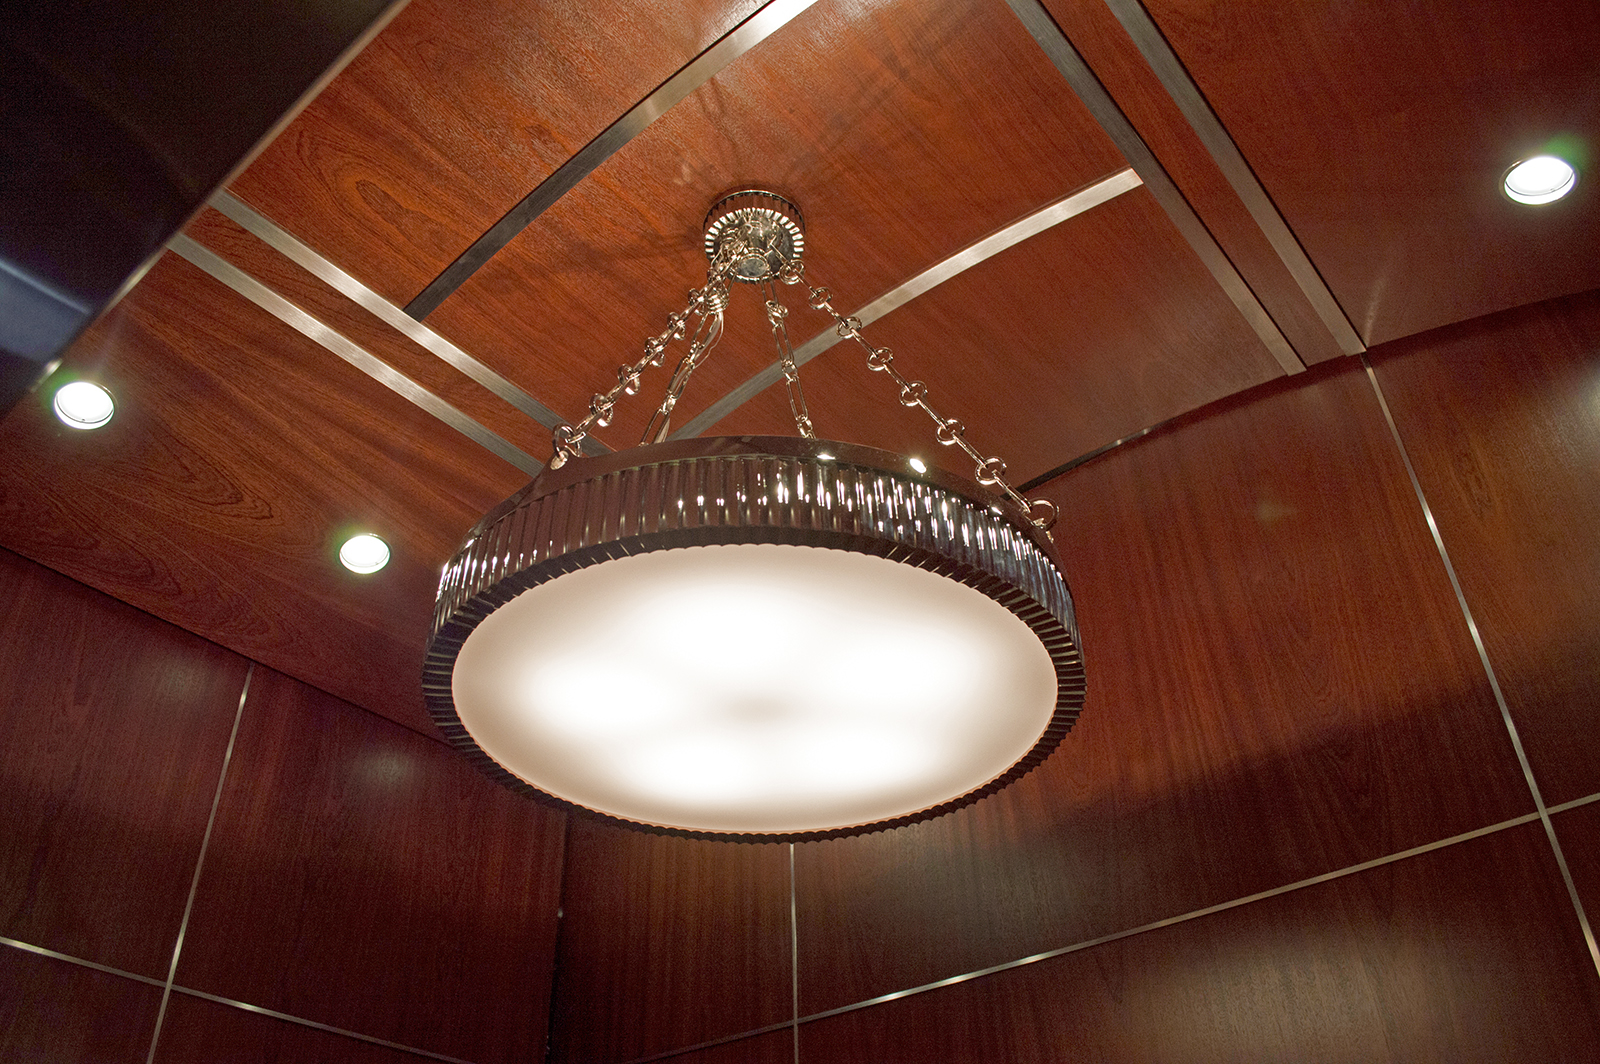 Top Ceiling: Refinished existing wood and installed Stainless Steel #4 inlays.